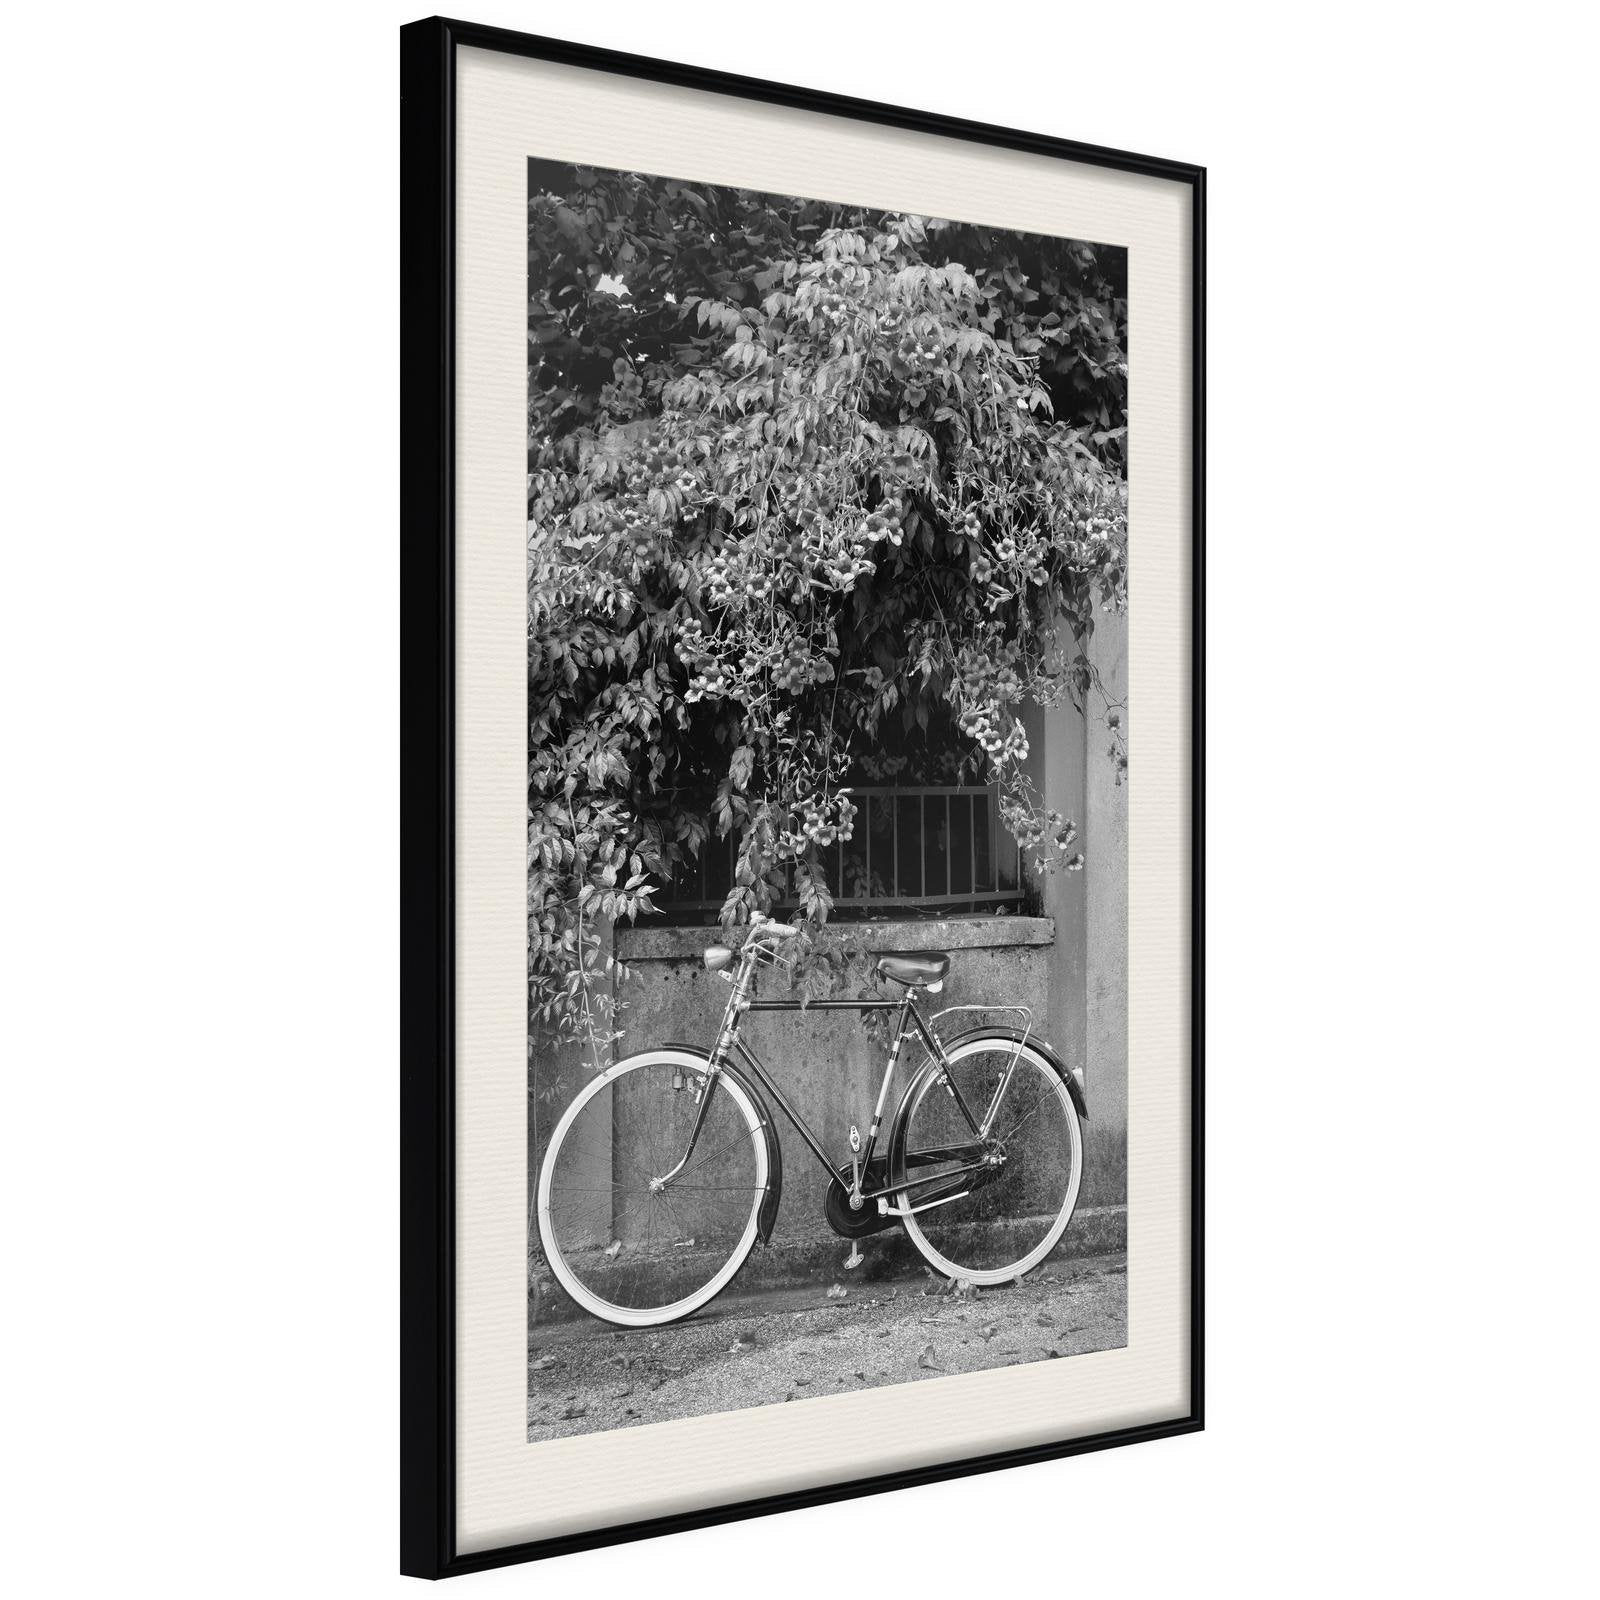 Inramad Poster / Tavla - Bicycle with White Tires-Poster Inramad-Artgeist-20x30-Svart ram med passepartout-peaceofhome.se